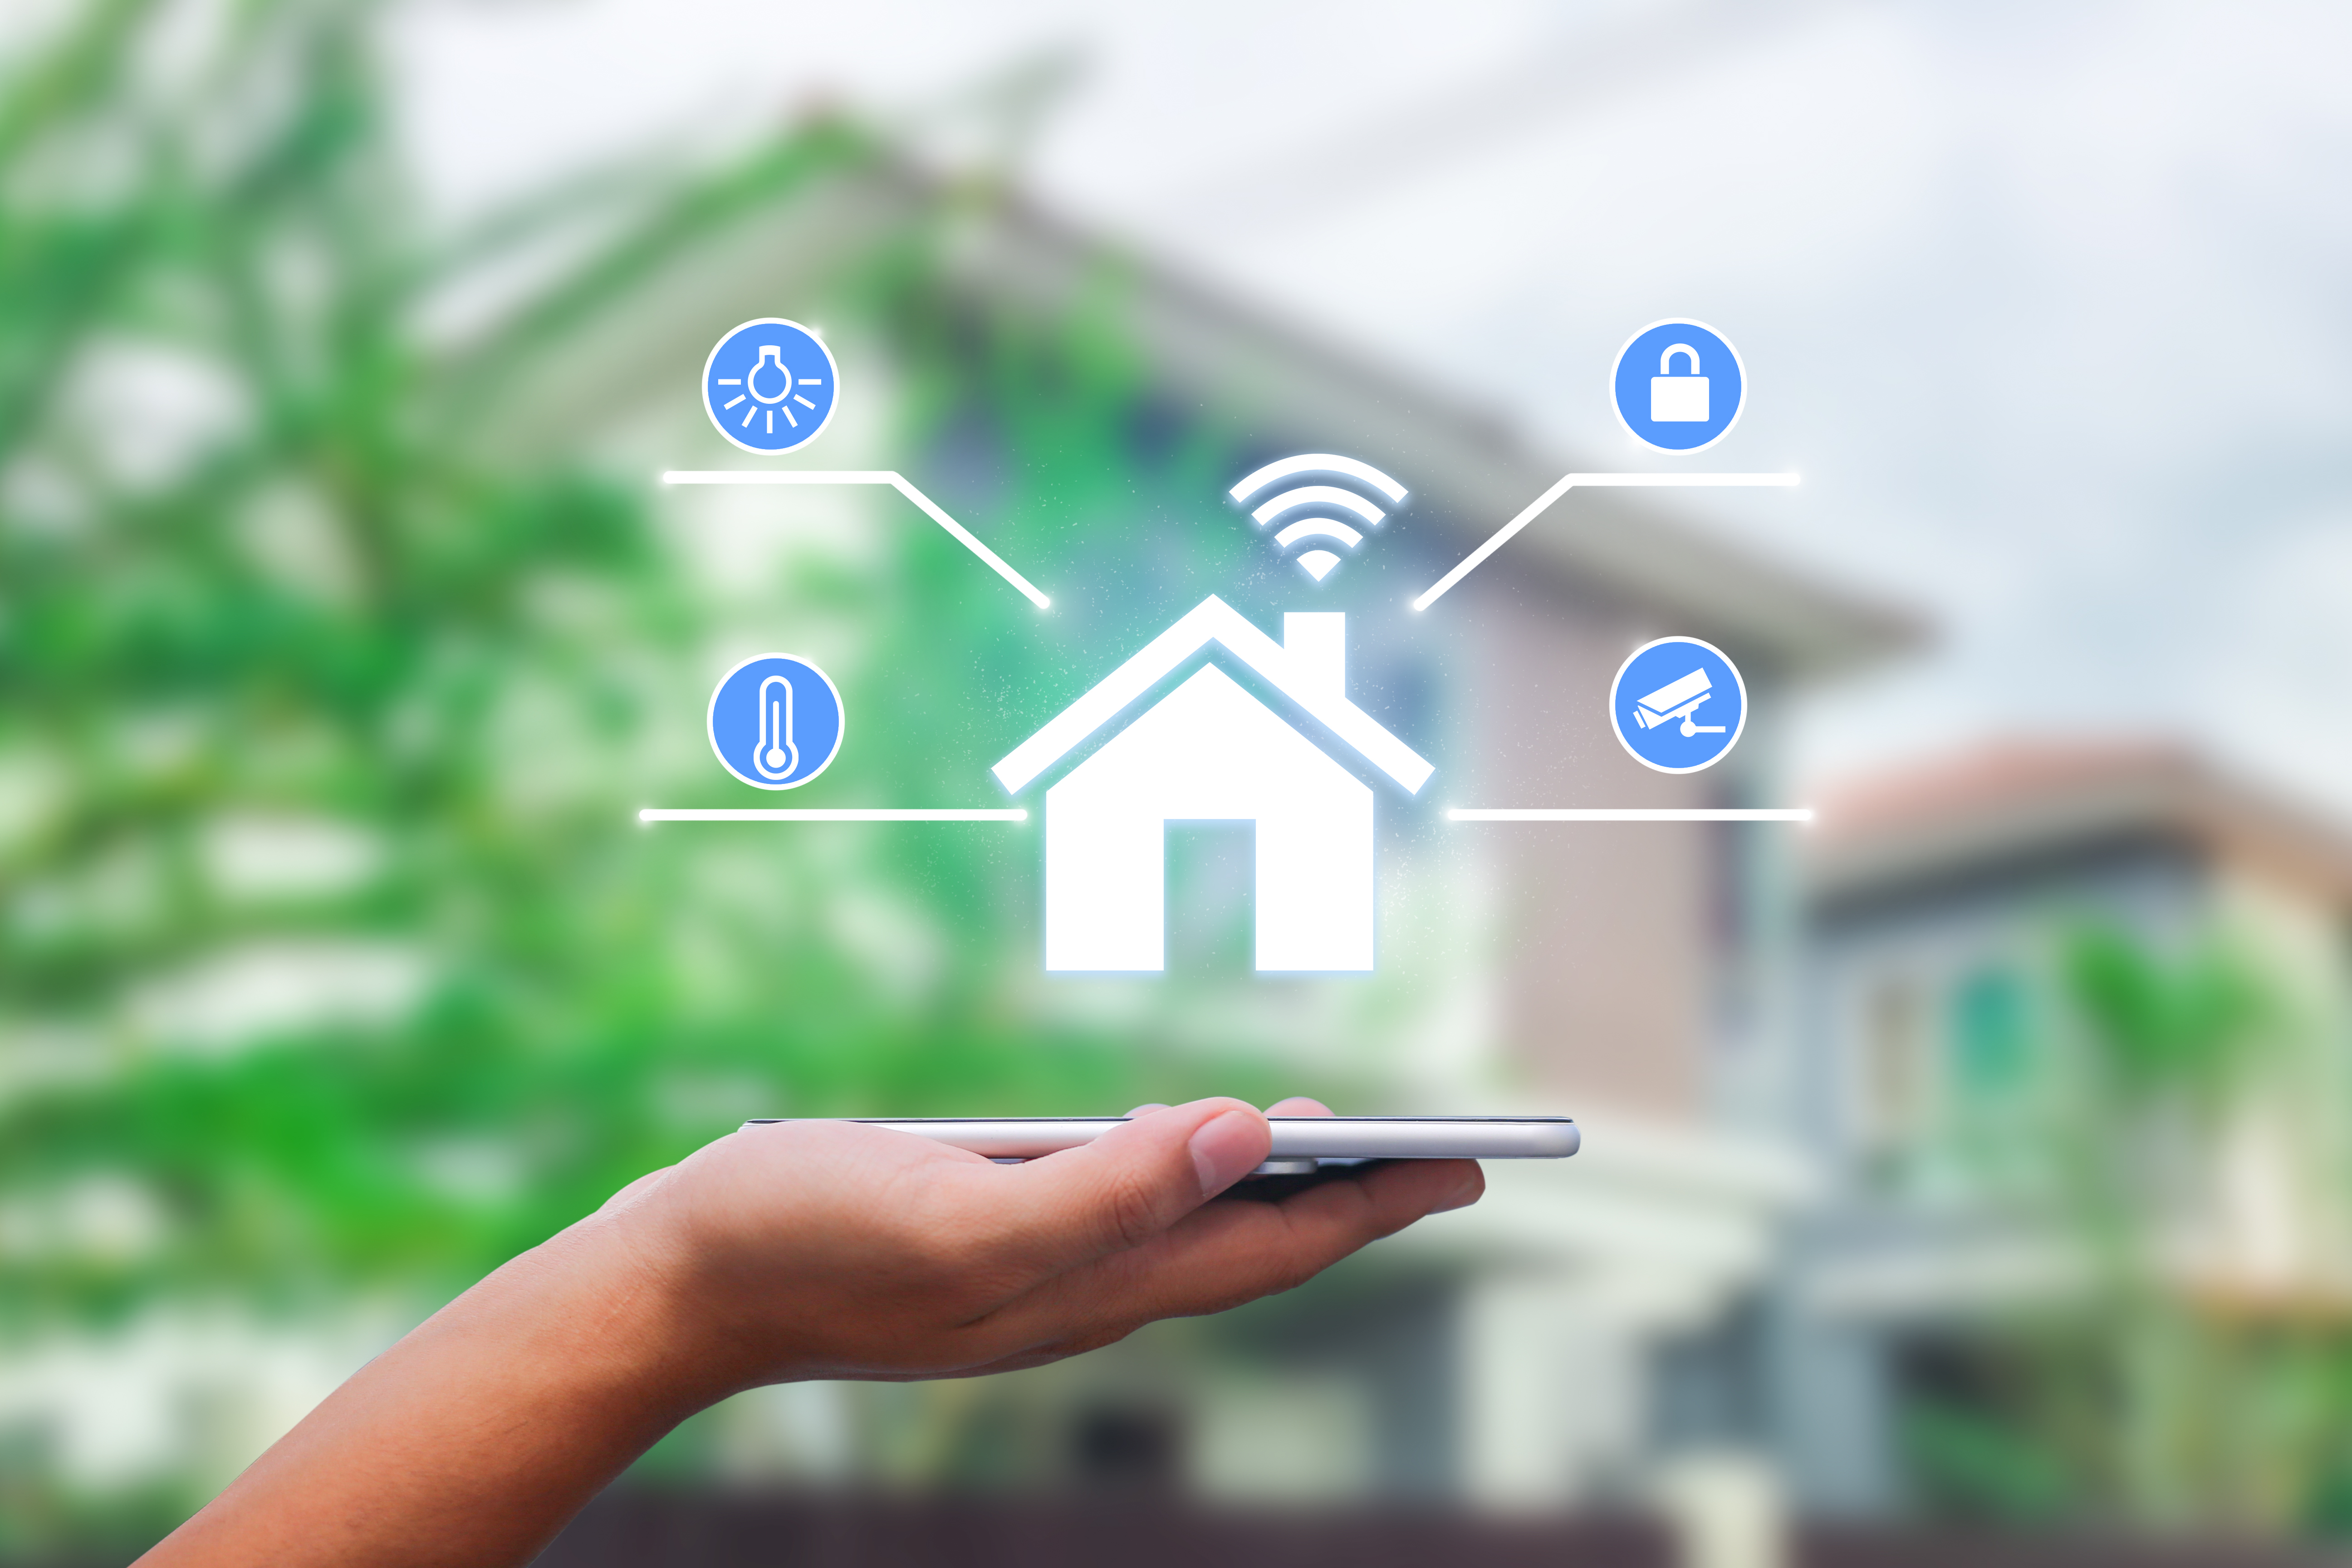 HMI Design for Smart Homes: What Is Next for this Technology?